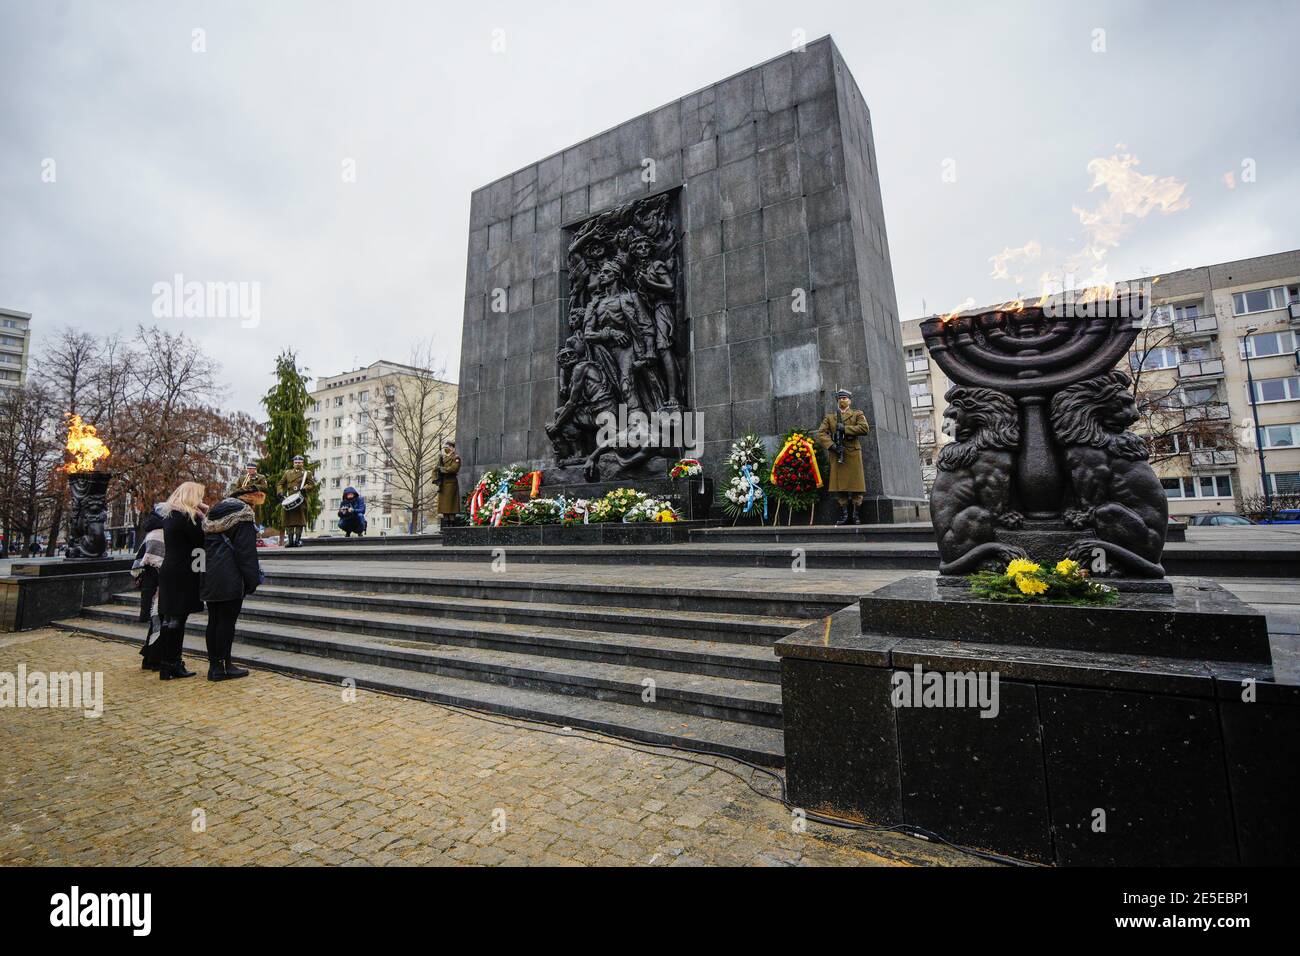 Warsaw, Poland. 27th Jan, 2021. People pay their respects to the victims of the Holocaust at the Ghetto Heroes Monument in Warsaw, Poland, on Jan. 27, 2021. Amid the ongoing COVID-19 pandemic, Poland commemorated the International Holocaust Remembrance Day on Wednesday almost fully online, with limited live events including honor guards and wreath-laying at various monuments throughout the country. Credit: Jaap Arriens/Xinhua/Alamy Live News Stock Photo